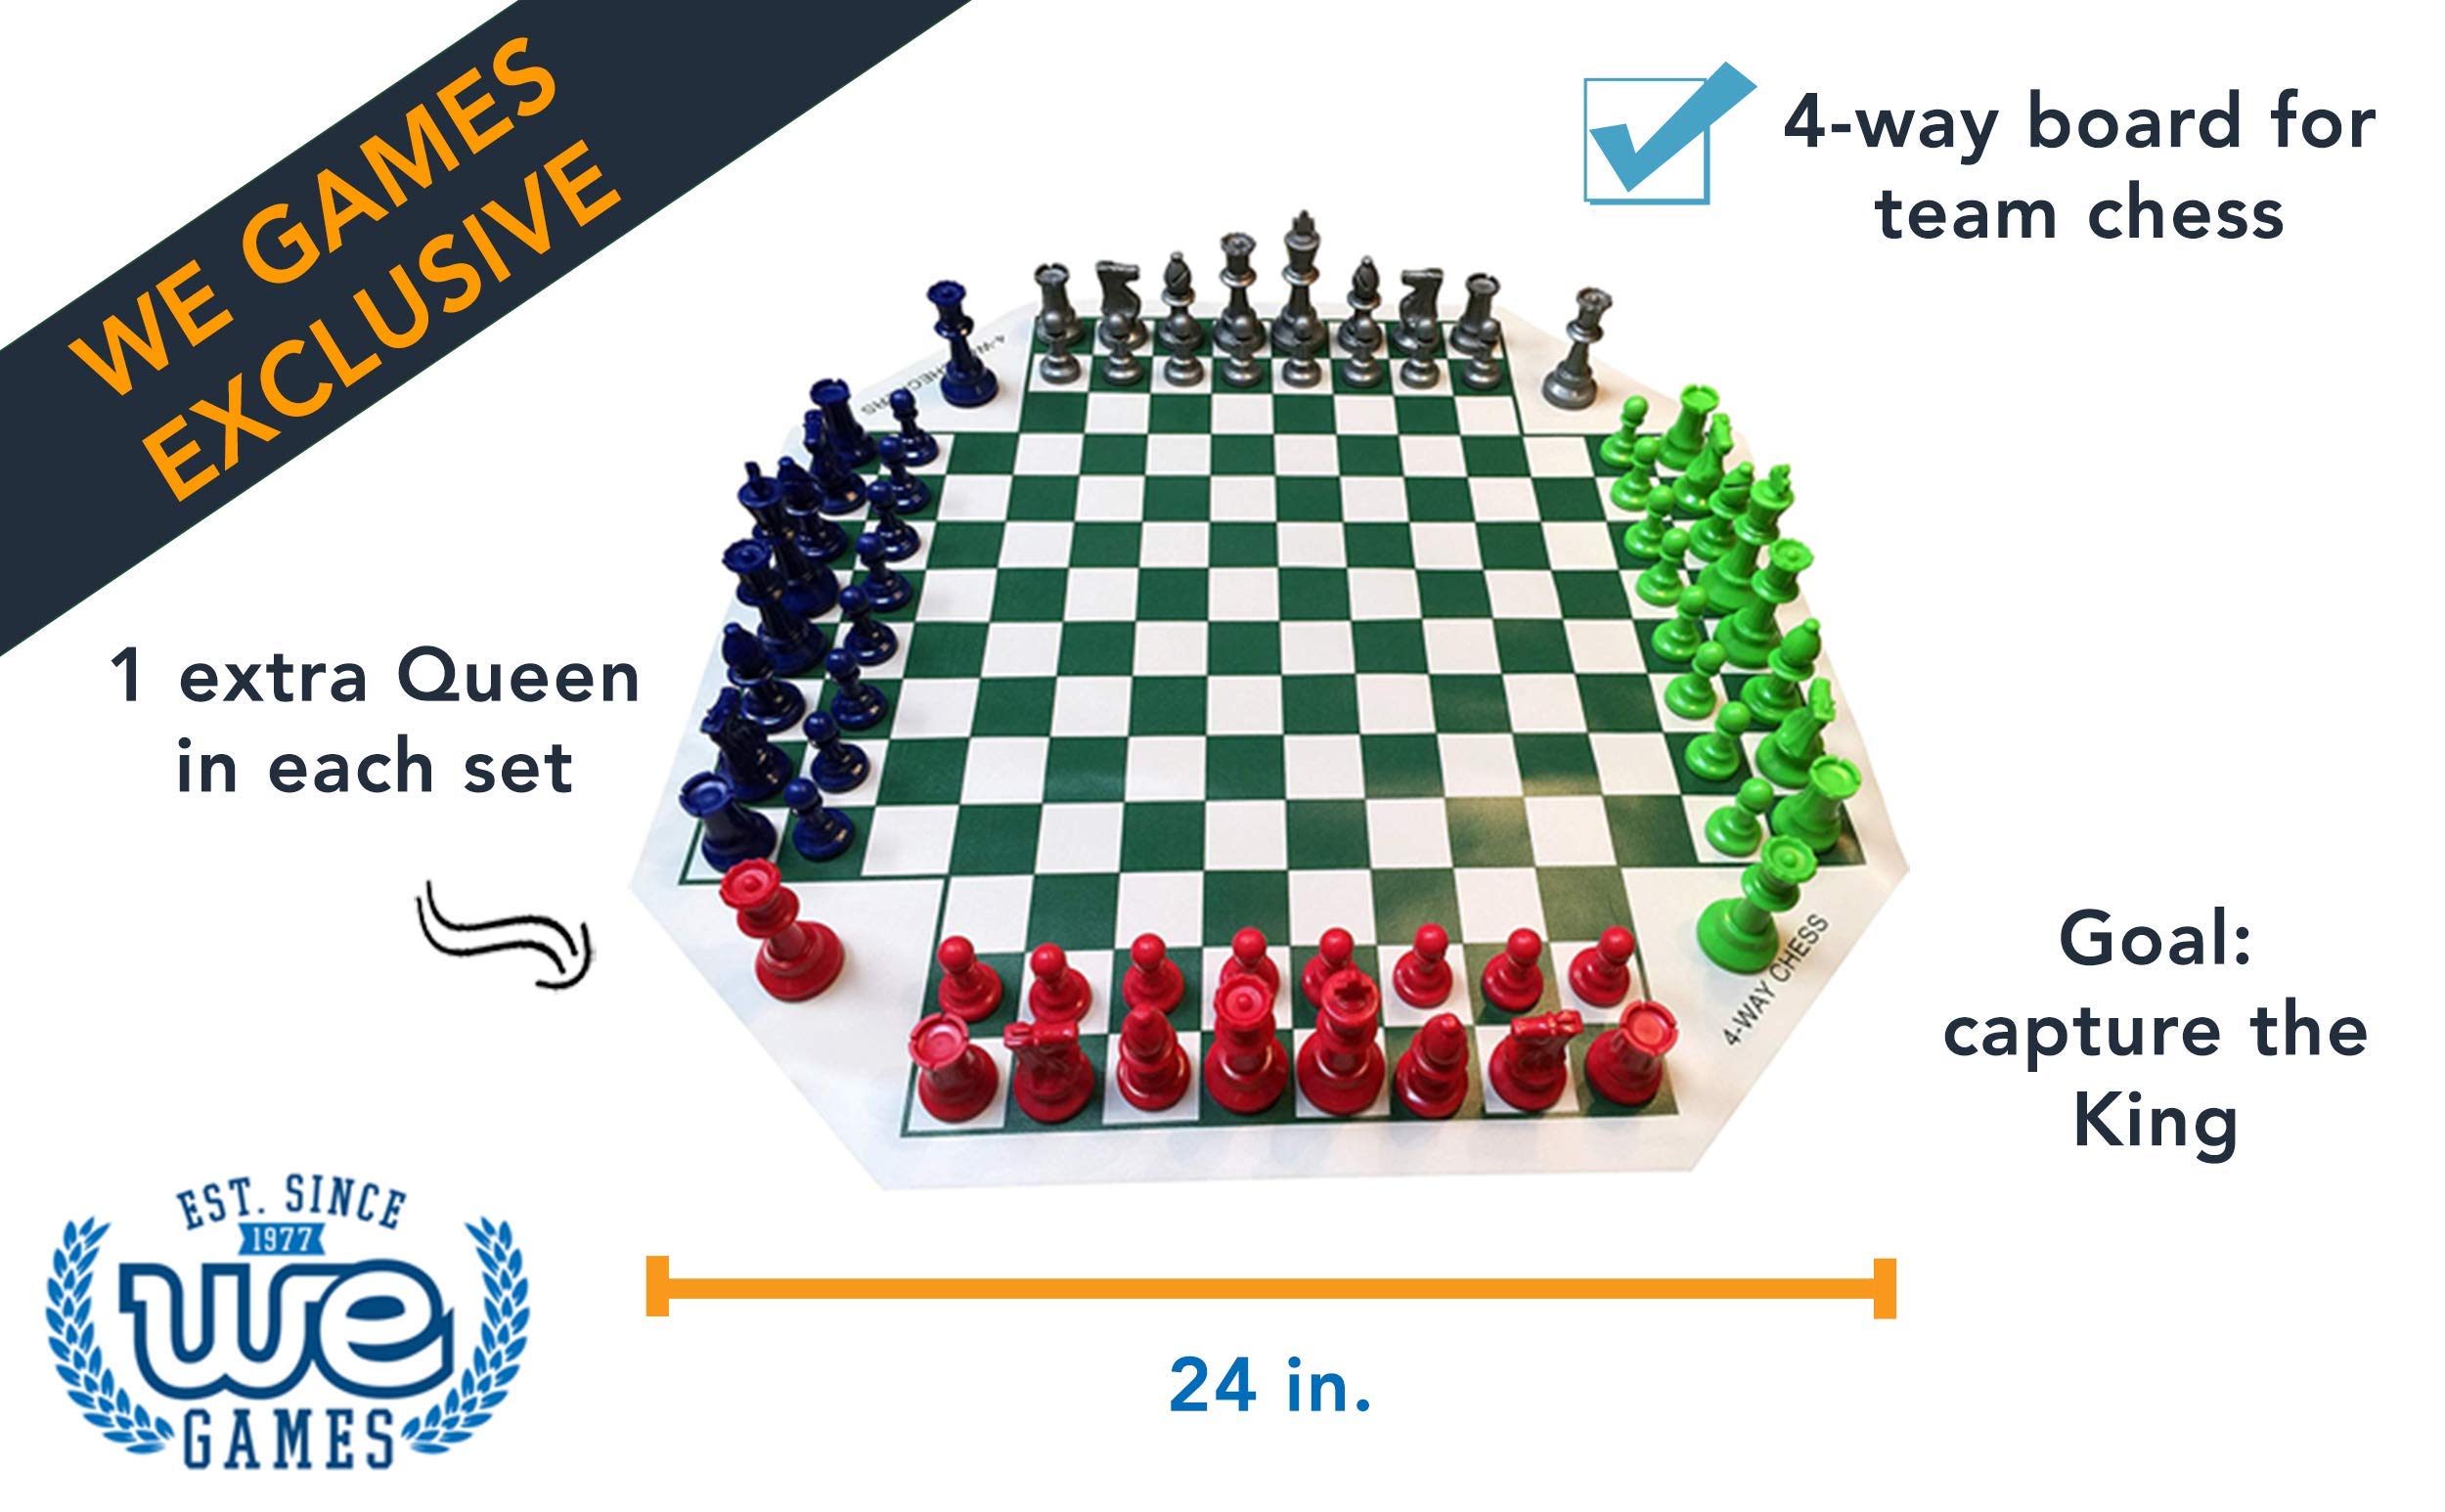 WE Games Four Player Chess Set, Chess Board for Team Chess, Combination Chess Game for Up to 4 Players, Unique Chess Sets for Adults and Kids, Roll Up Vinyl Chess Mat with 4 Sets of Chess Pieces